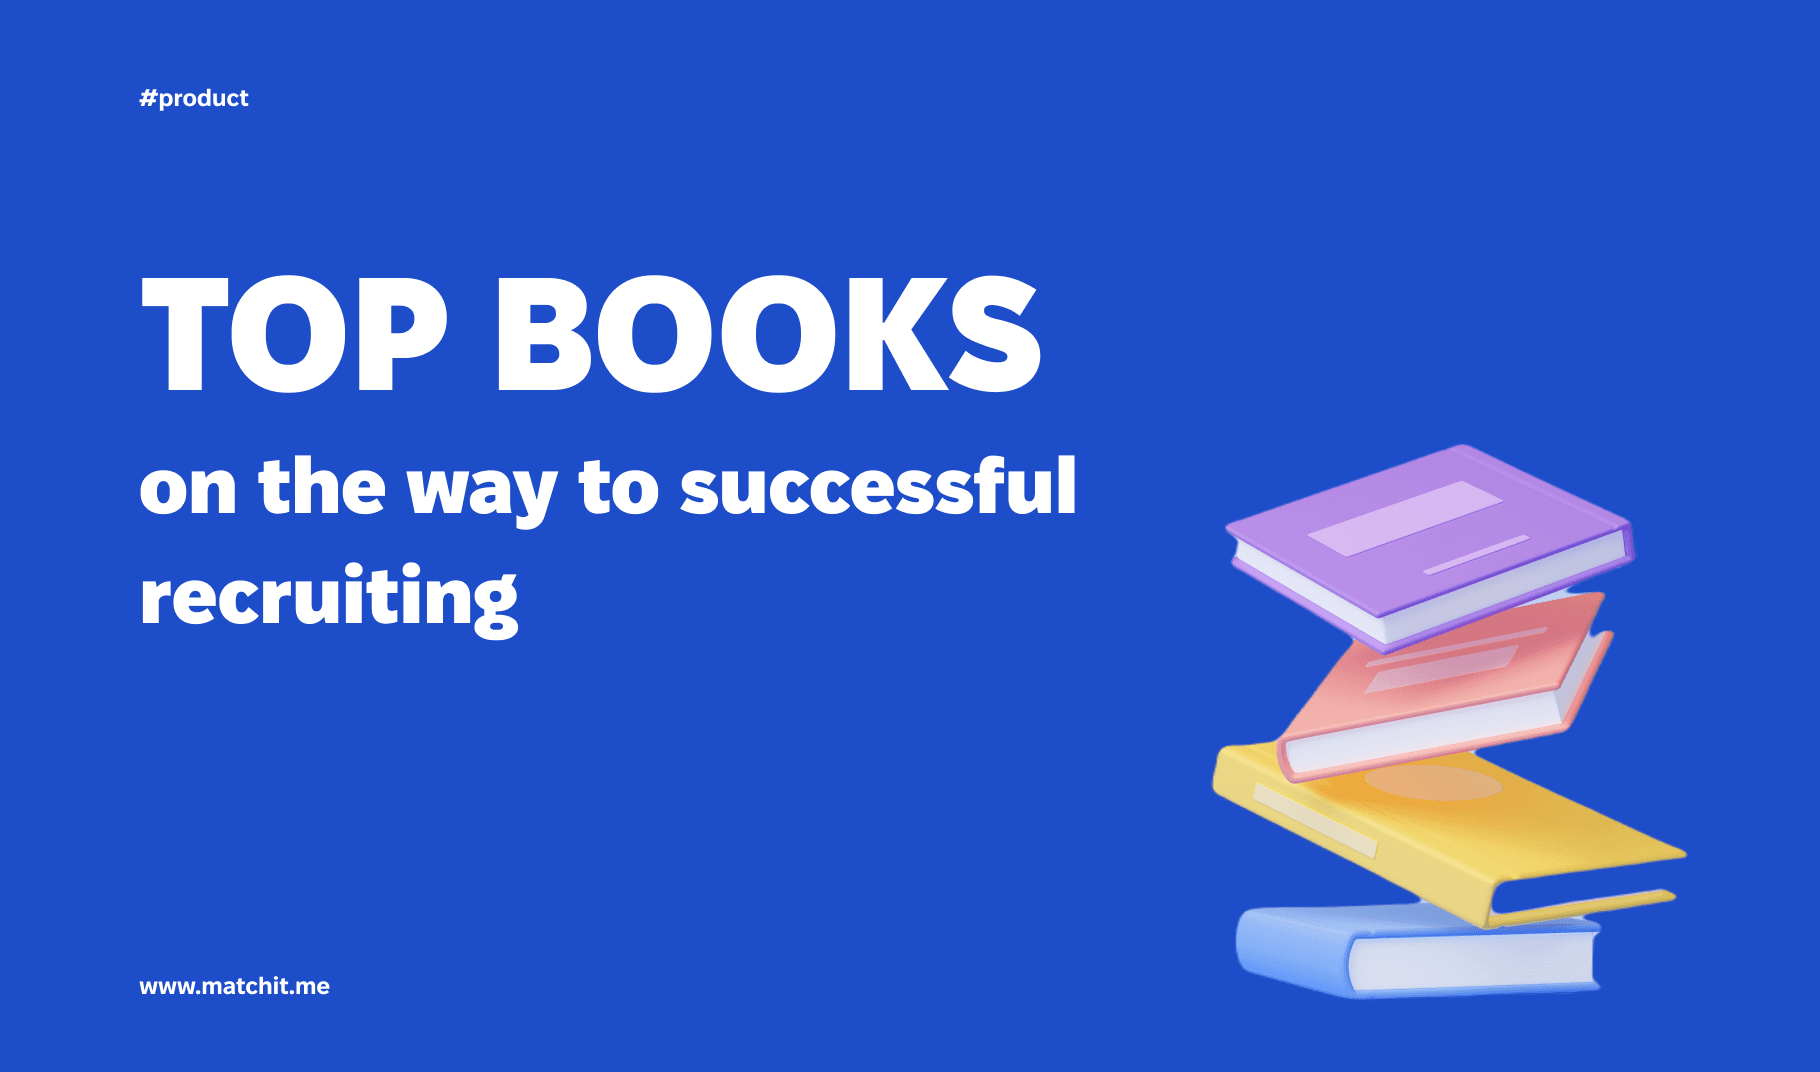 TOP BOOKS on the way to successful recruiting